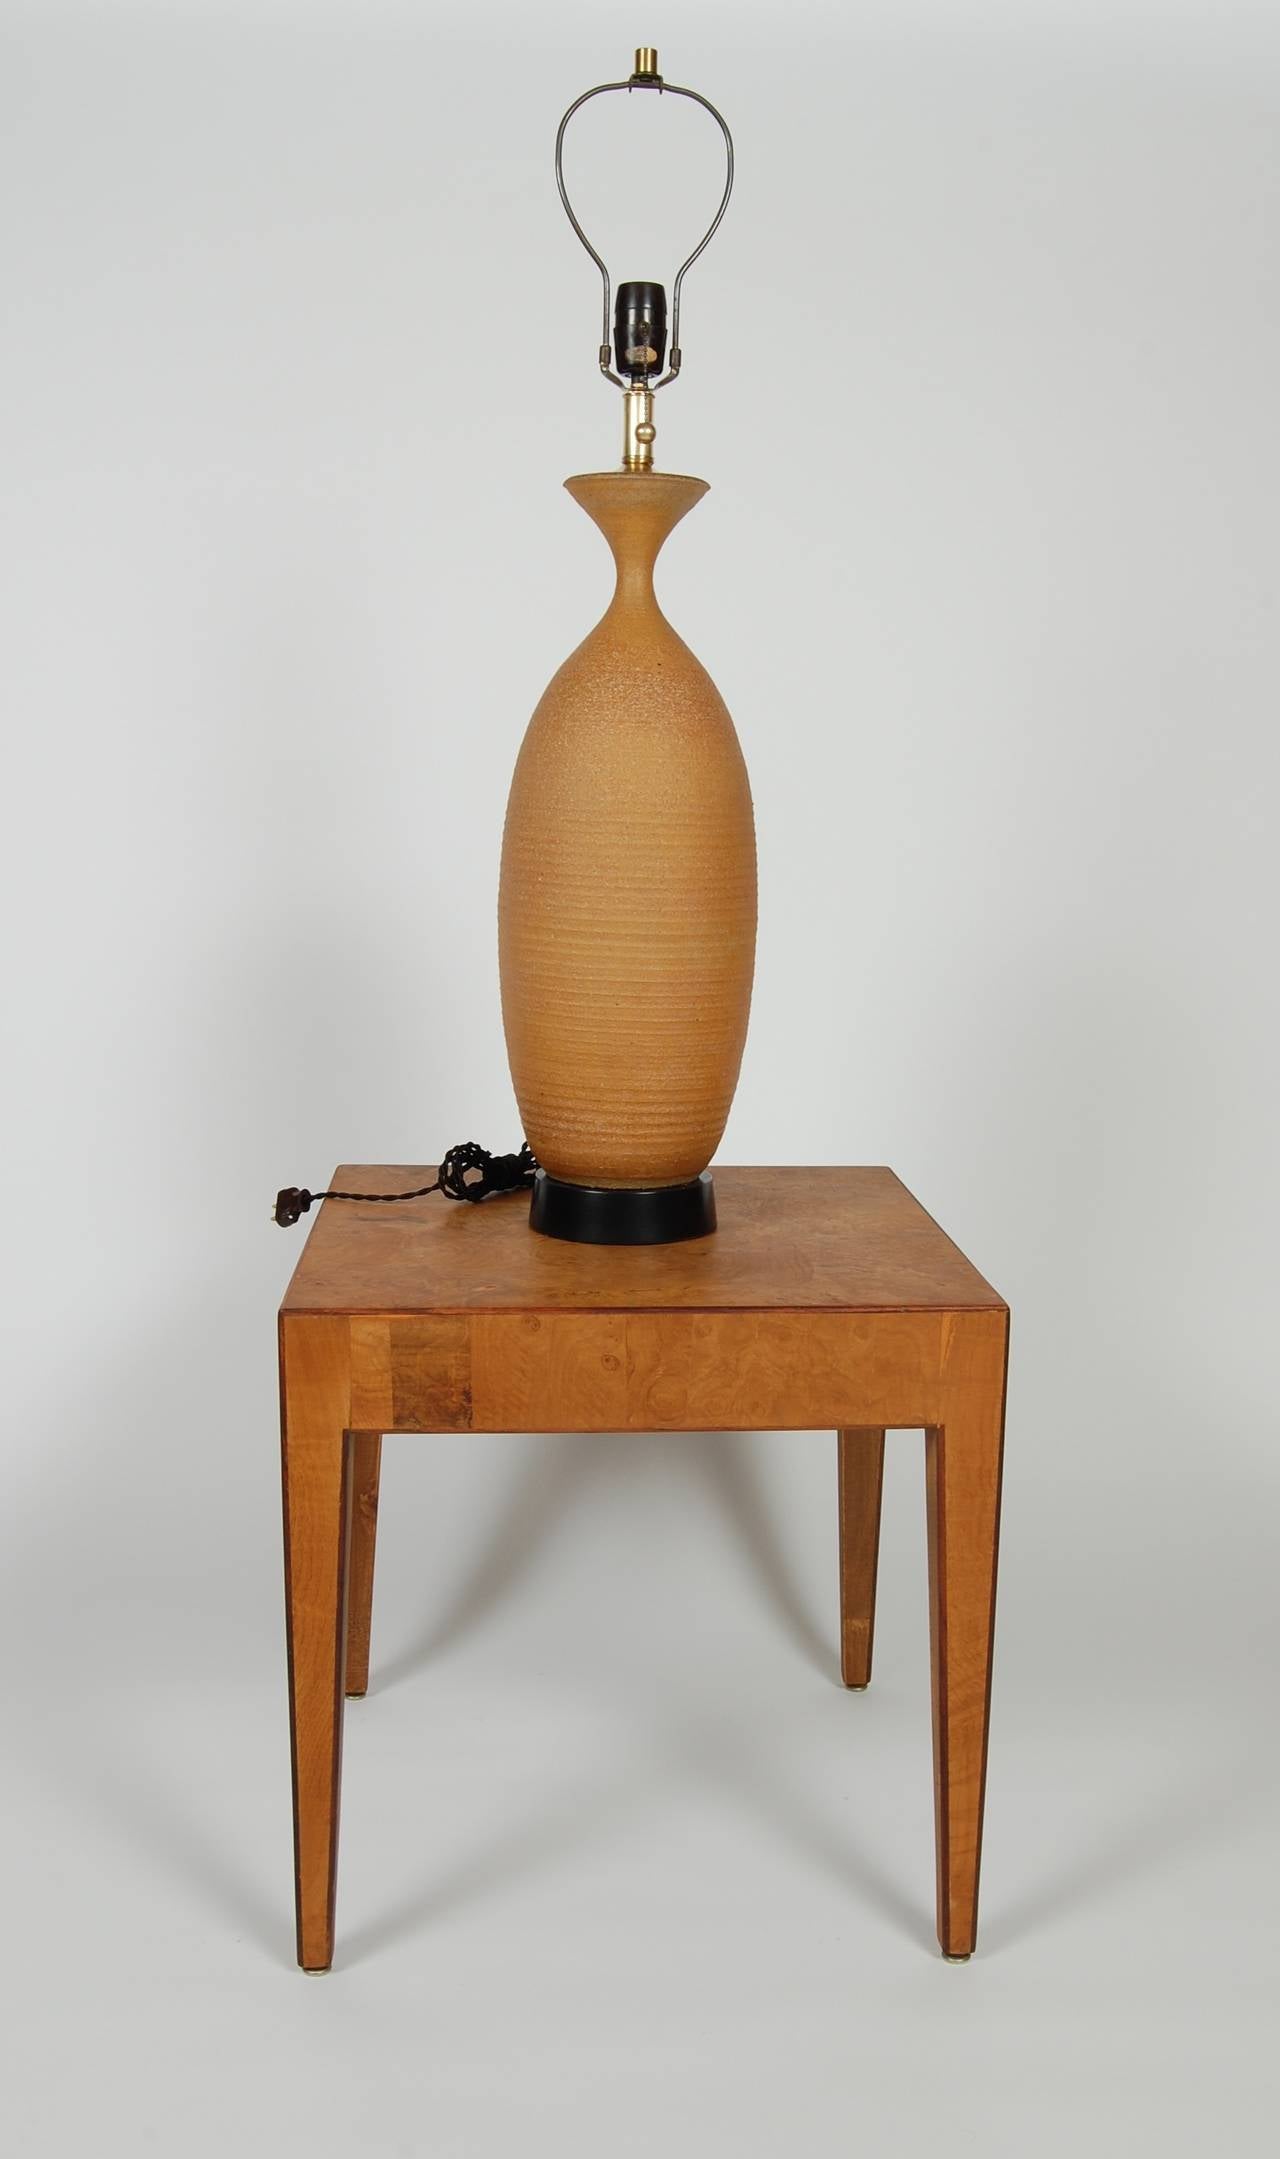 Tall and sculptural ceramic studio lamp by Bob Kinzie for his company Affiliated Craftsmen of California. Earthenware clay body with concentric grooved rings along its sides. Soft hues to the clay and resting on a black lacquered base, newly rewired.